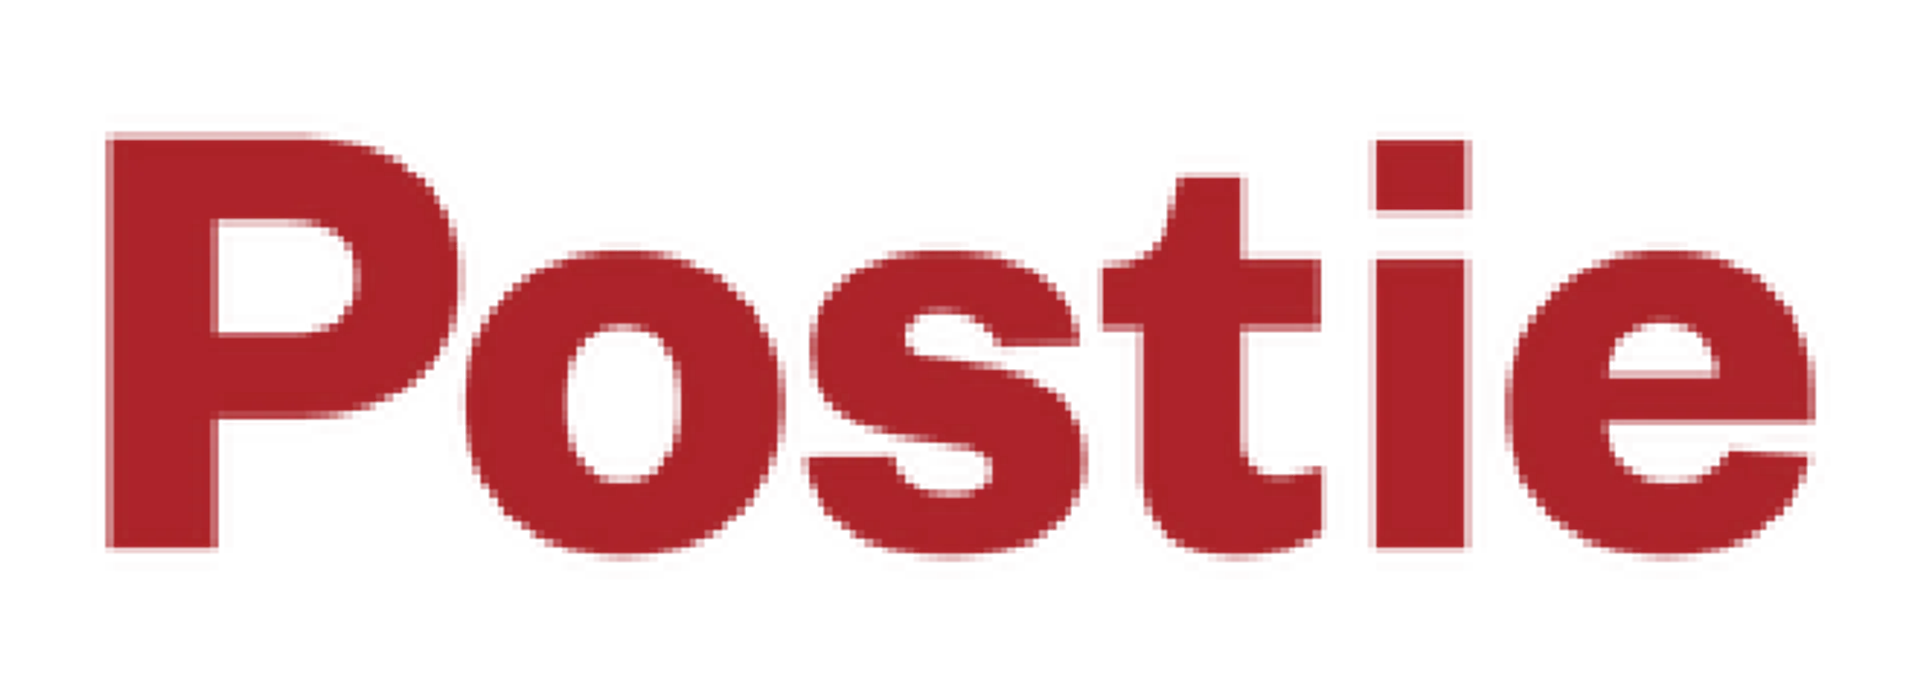 POSTIE logo. Current weekly ad